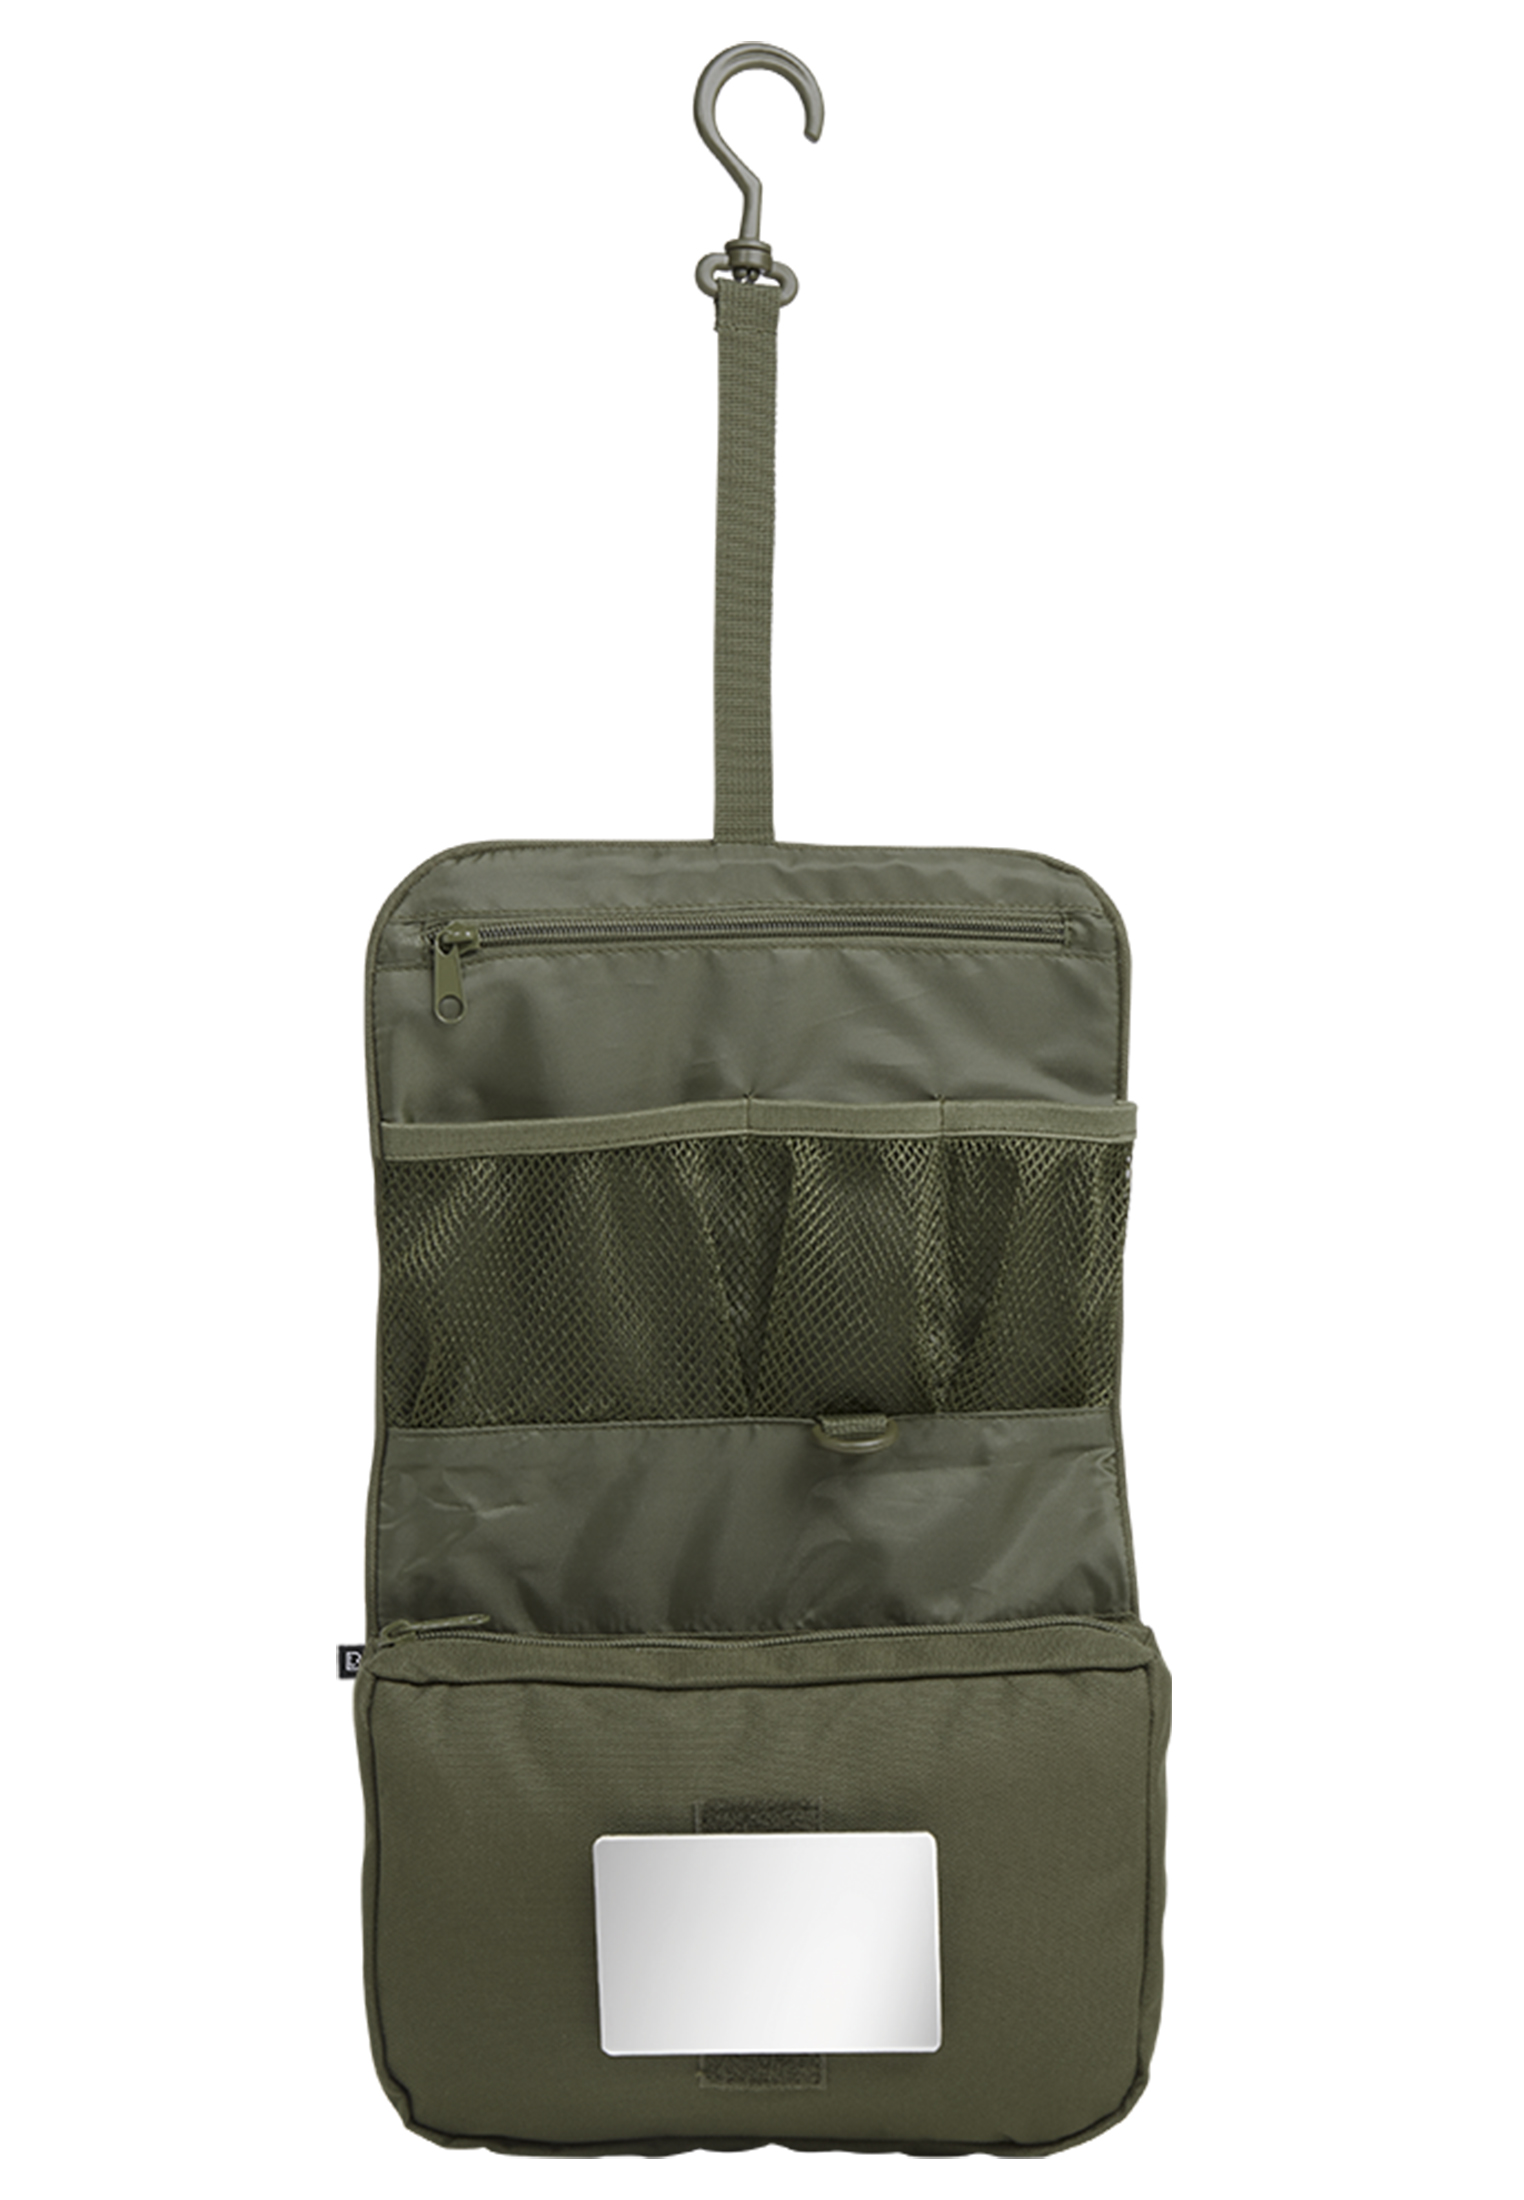 Taschen Toiletry Bag large in Farbe olive